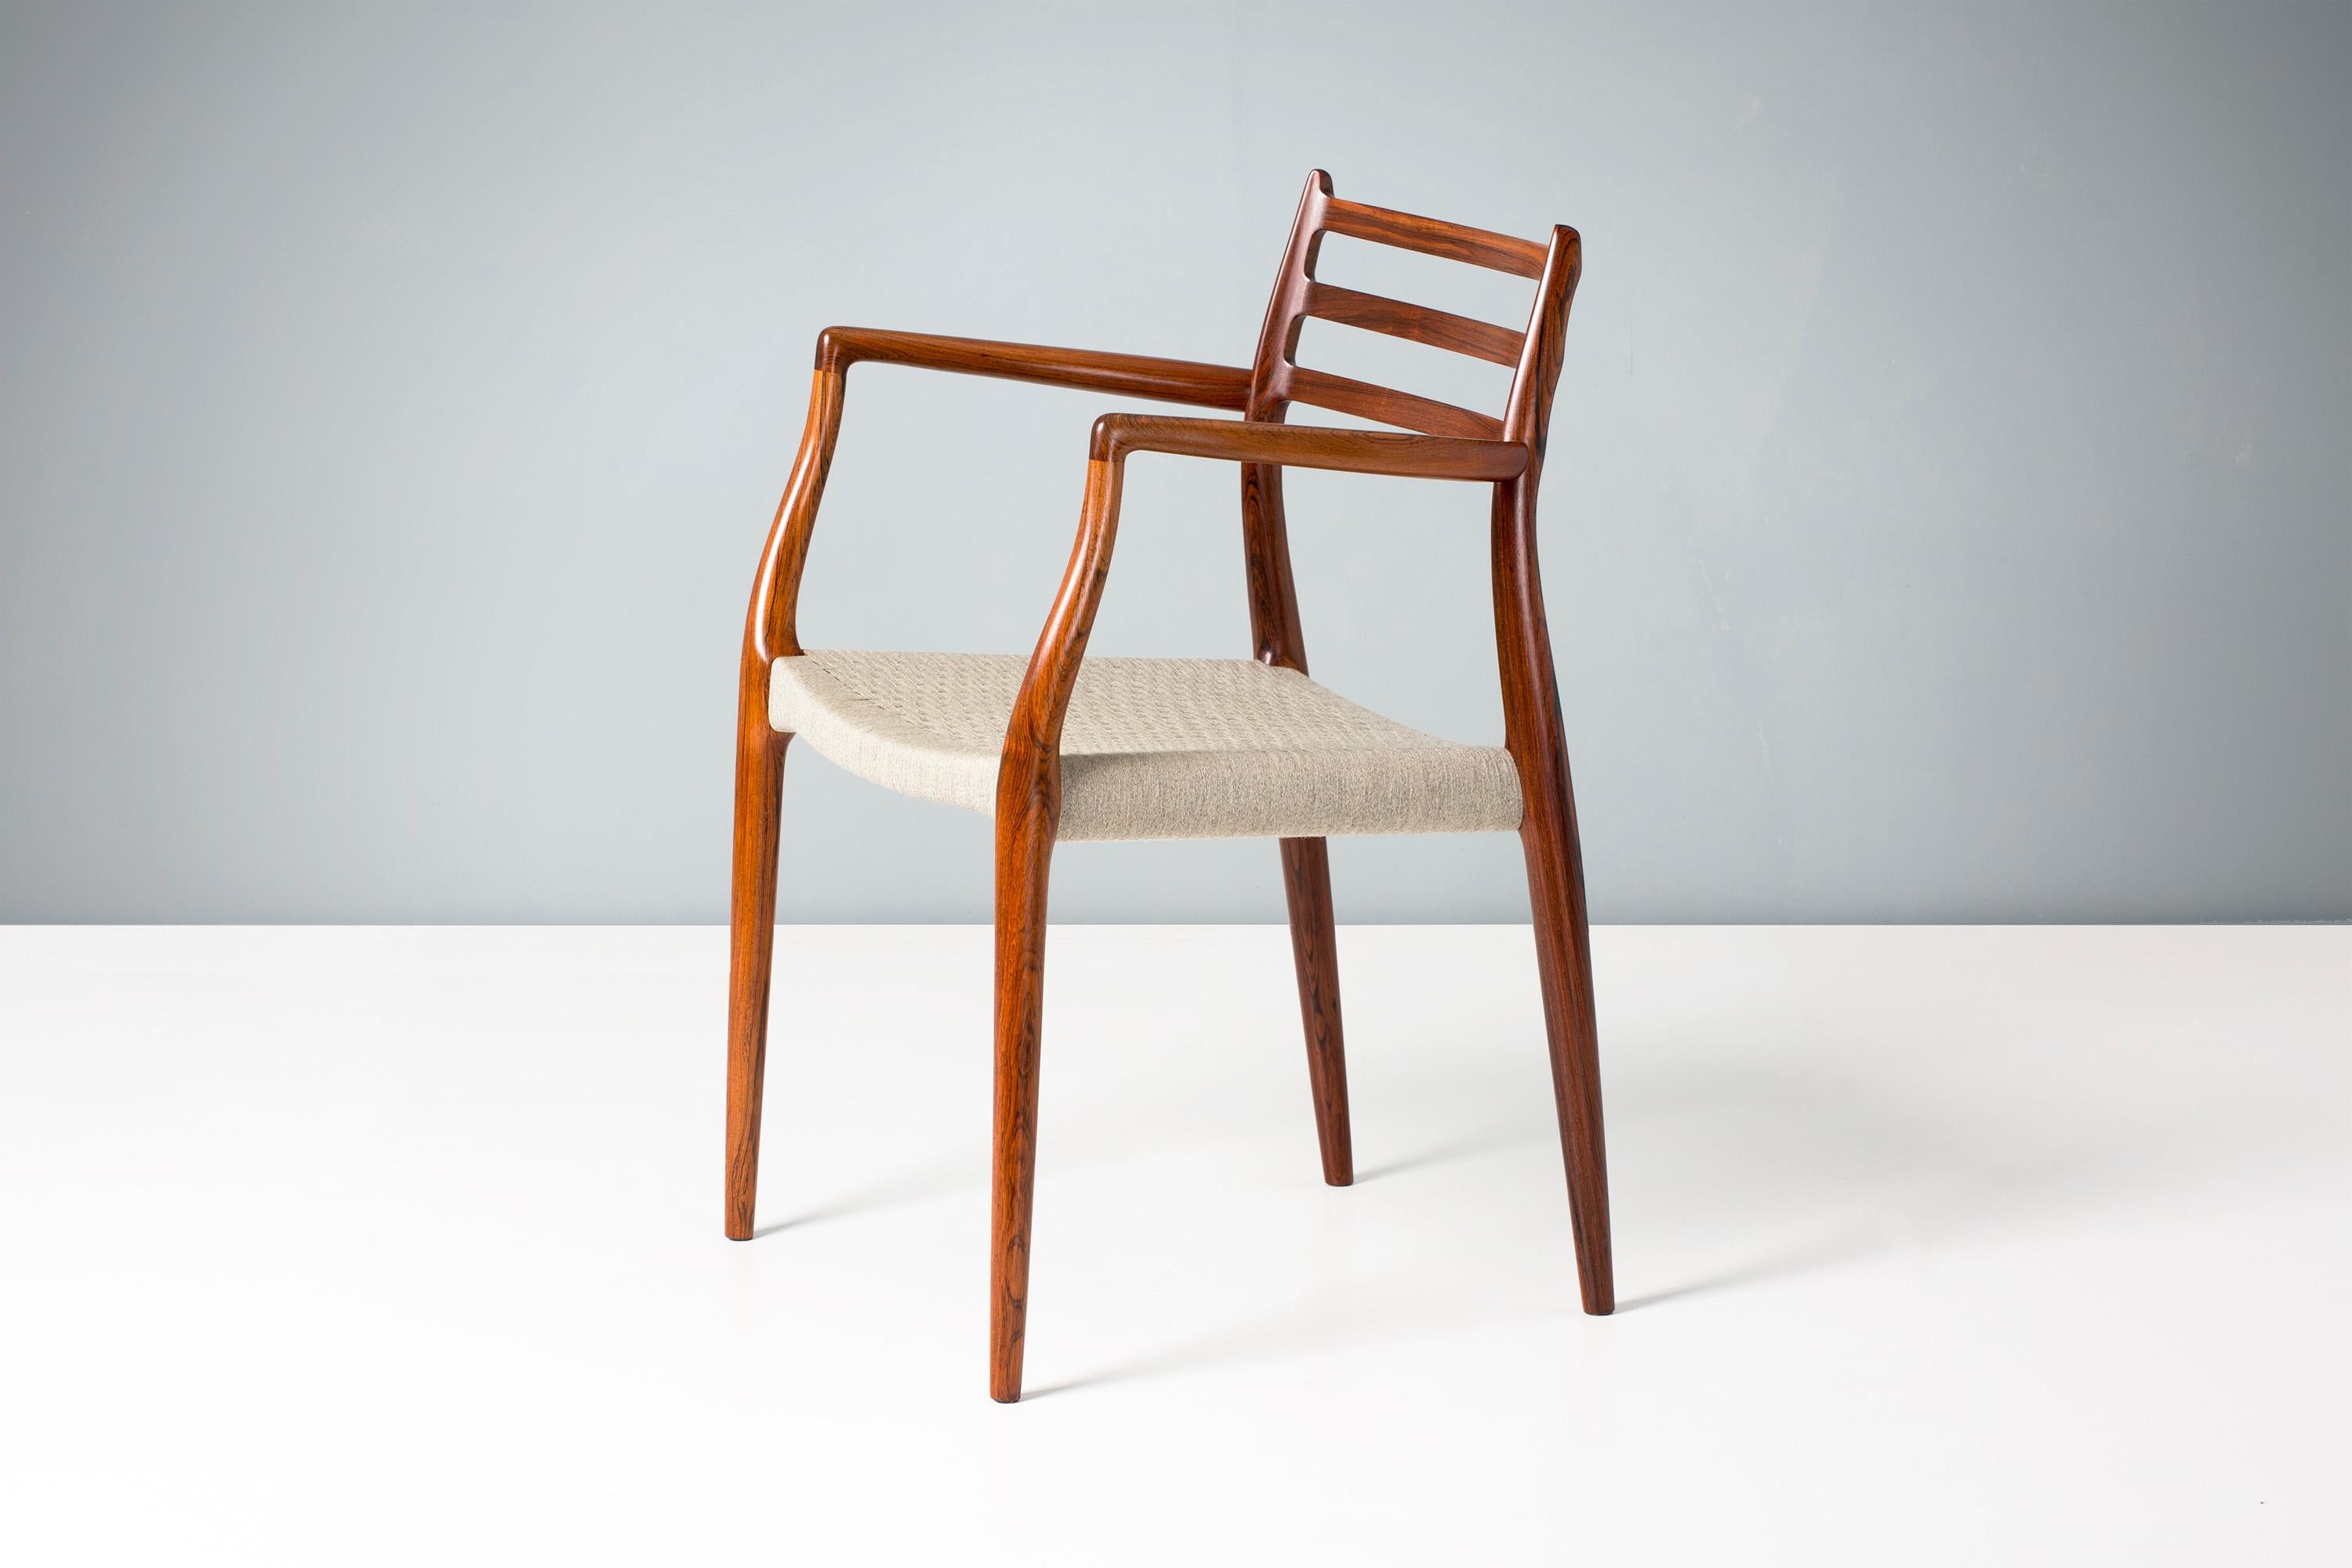 Niels Moller

Pair of model 62 armchair, 1962.

Rarely seen edition of this iconic design made from exquisite, highly figured Brazilian rosewood. Designed by Niels Moller for his own company: J.L. Moller Mobelfabrik in Denmark in 1962, the Model